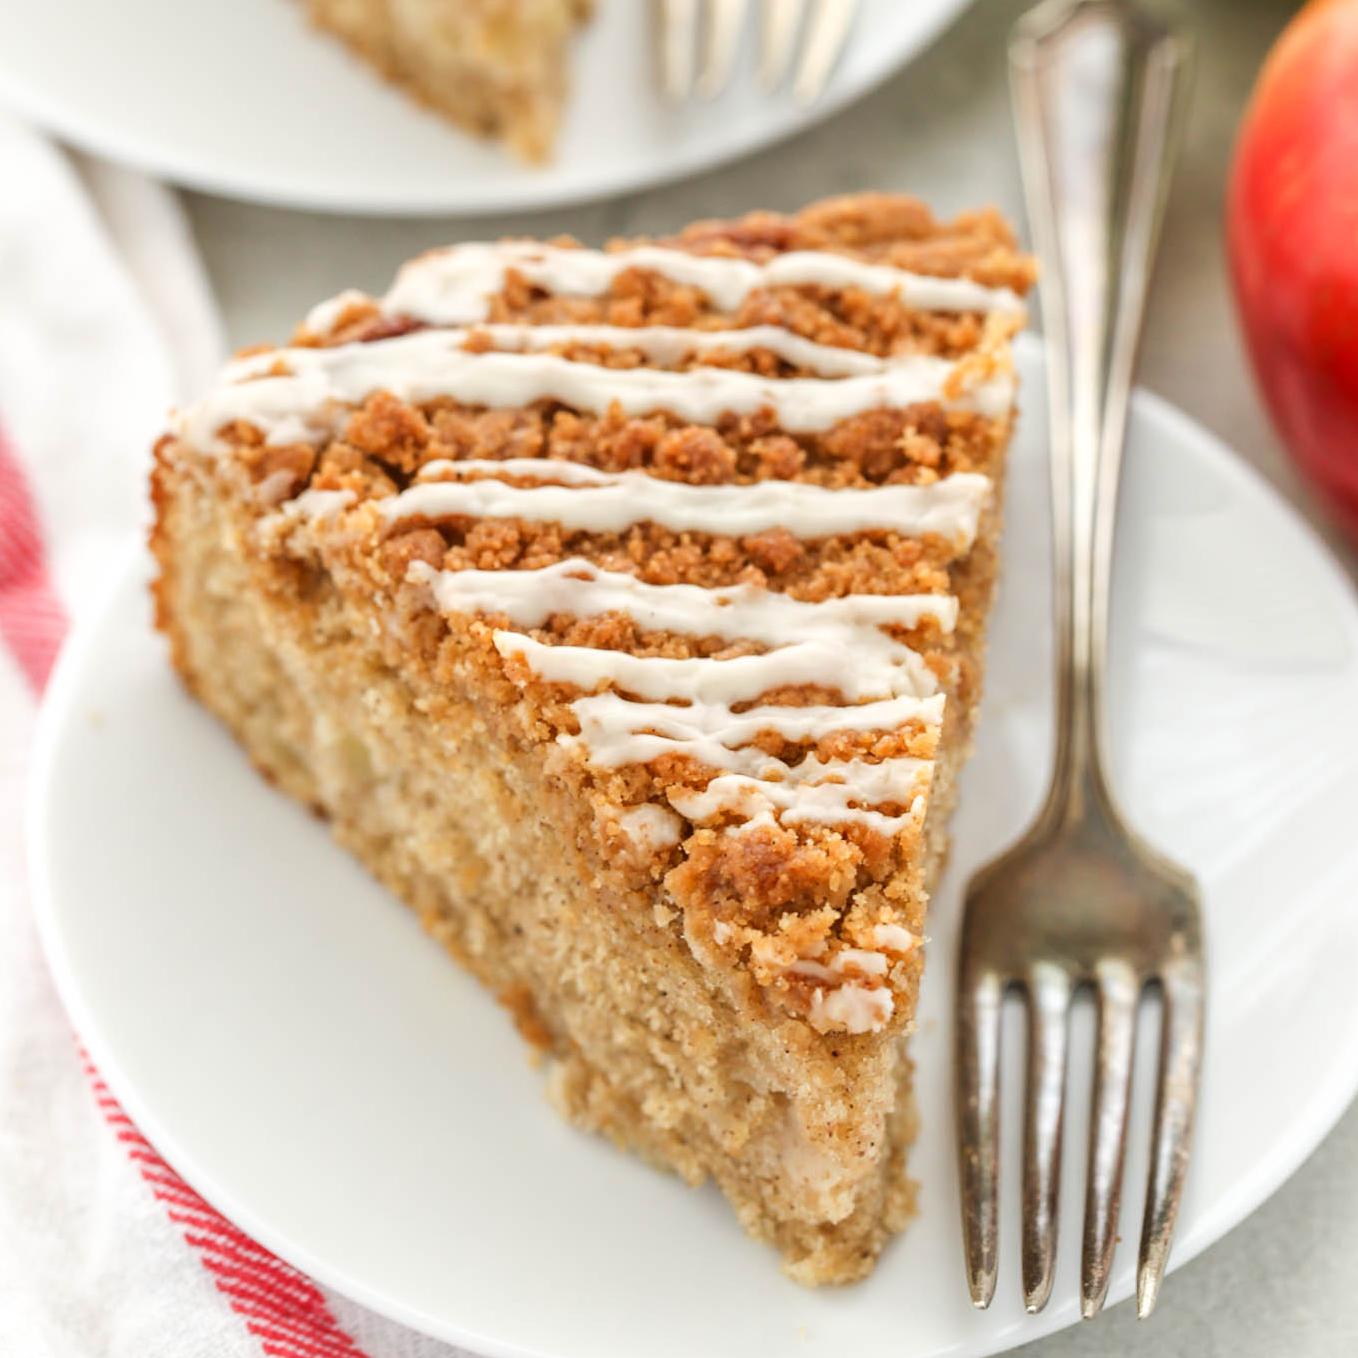  This Buttermilk-Apple Coffee Cake will make your taste buds dance!